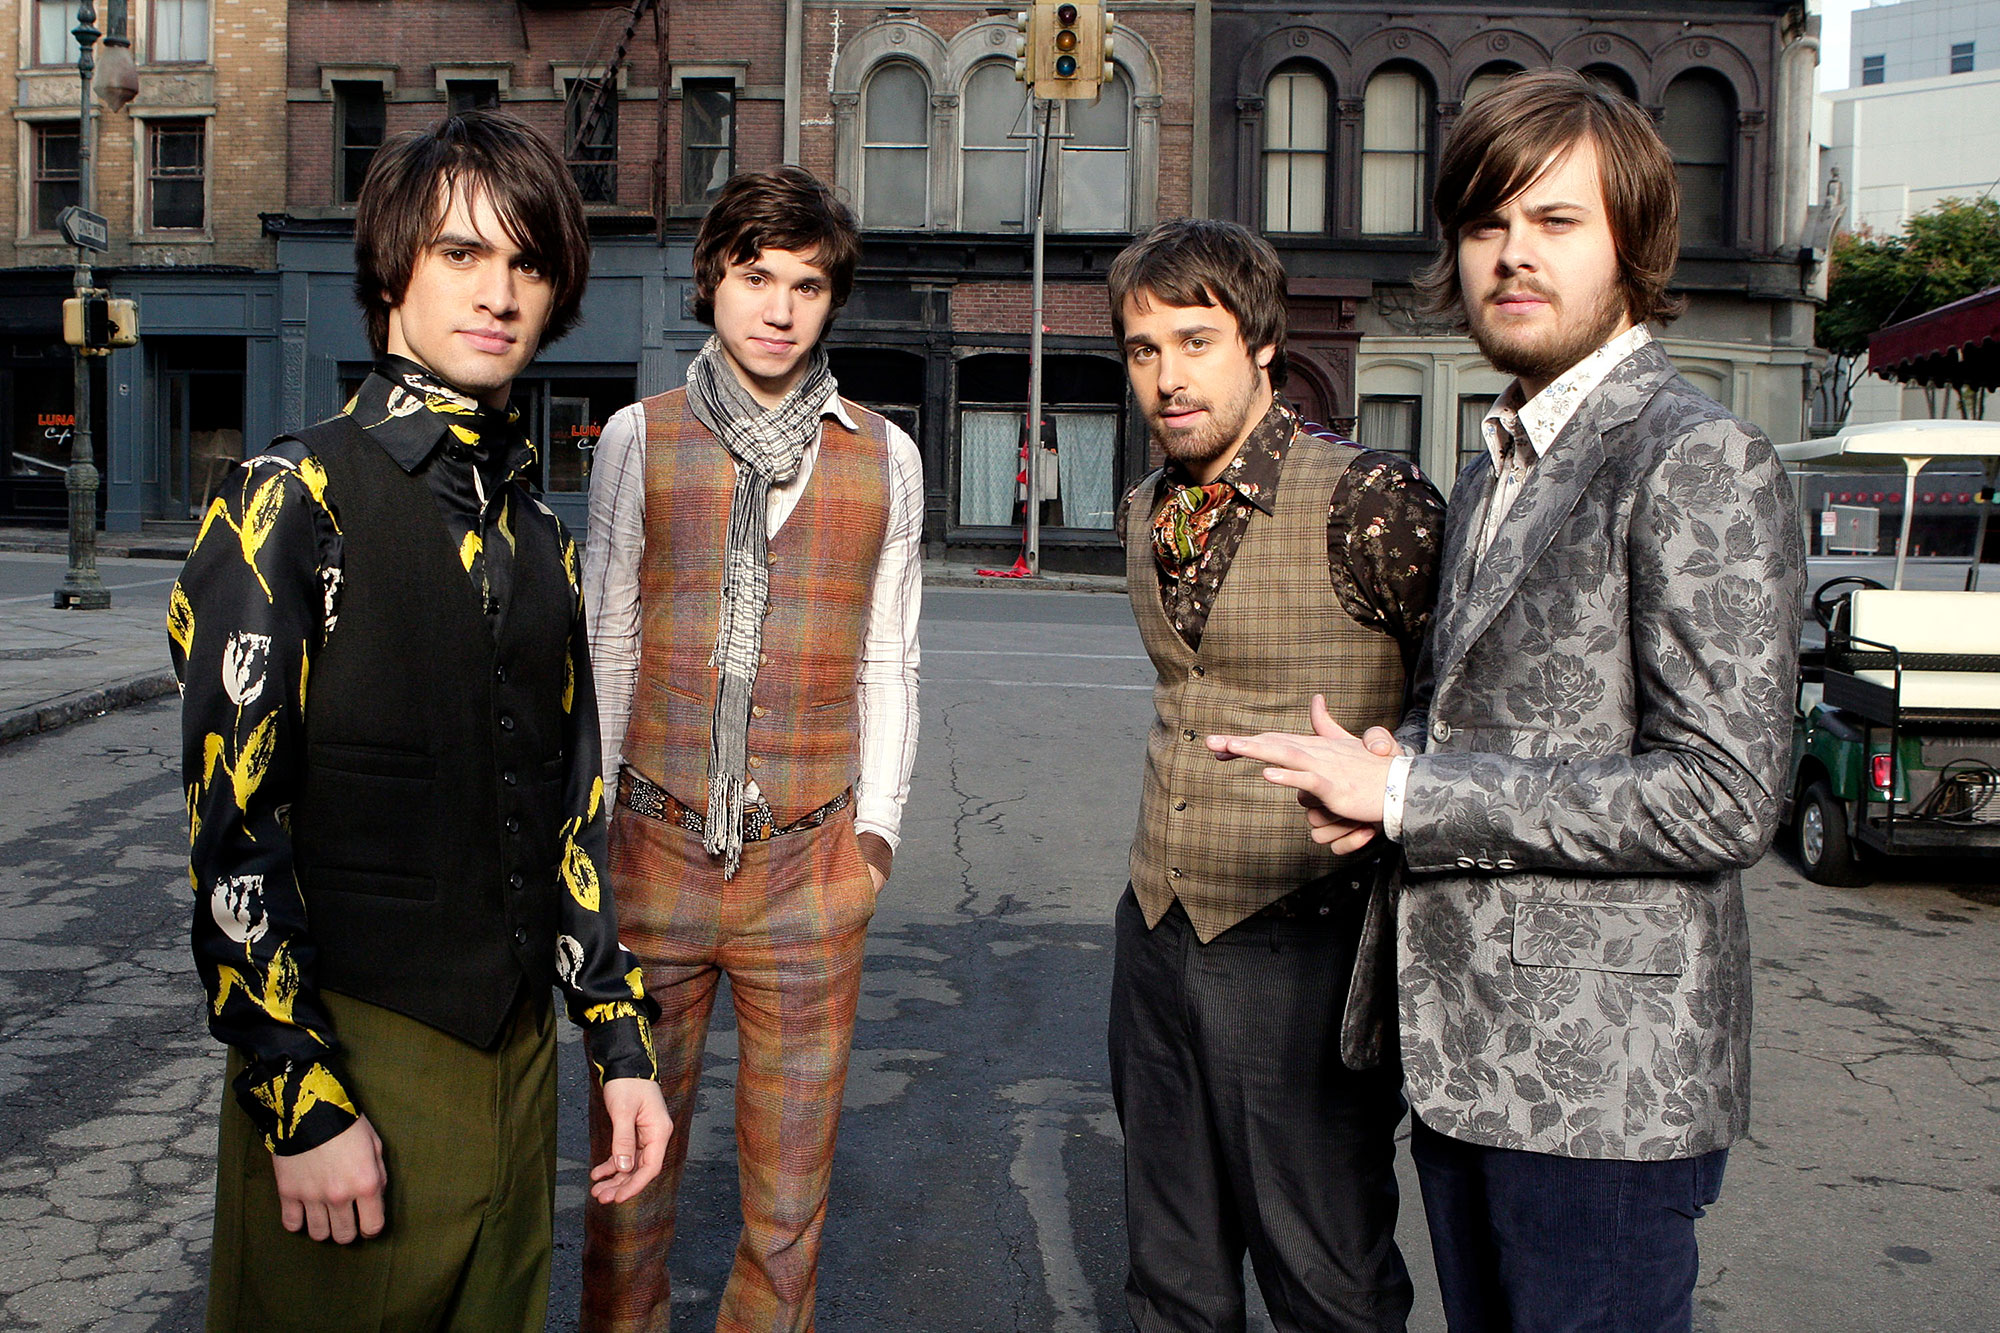 The pop band Panic! at the Disco